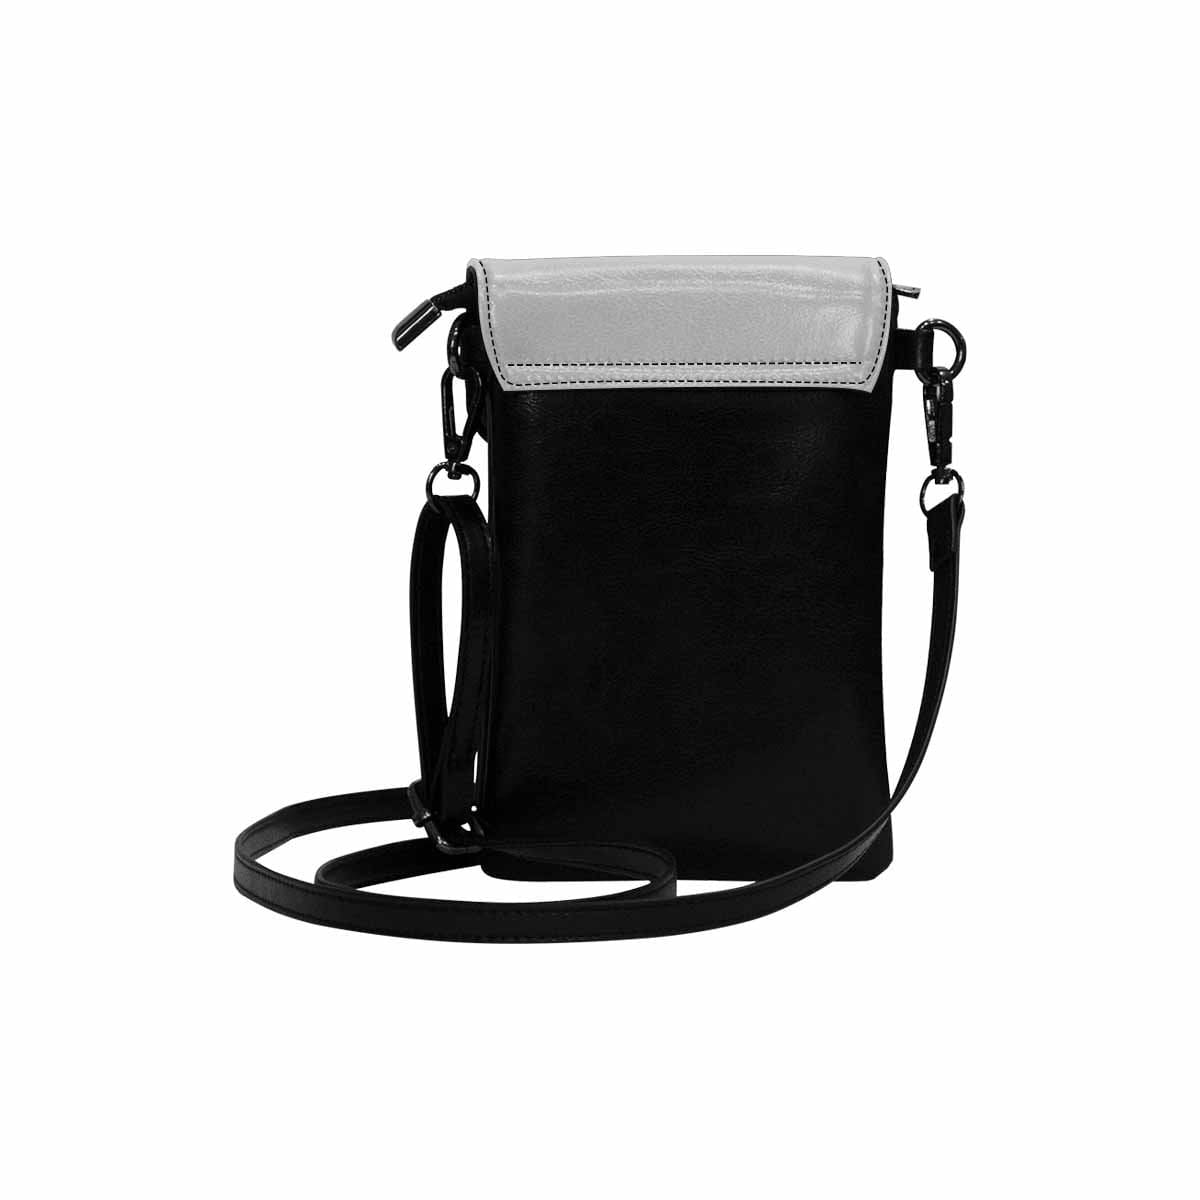 Womens Crossbody Bag Light Grey Small Cell Phone Purse - Bags | Wallets | Phone